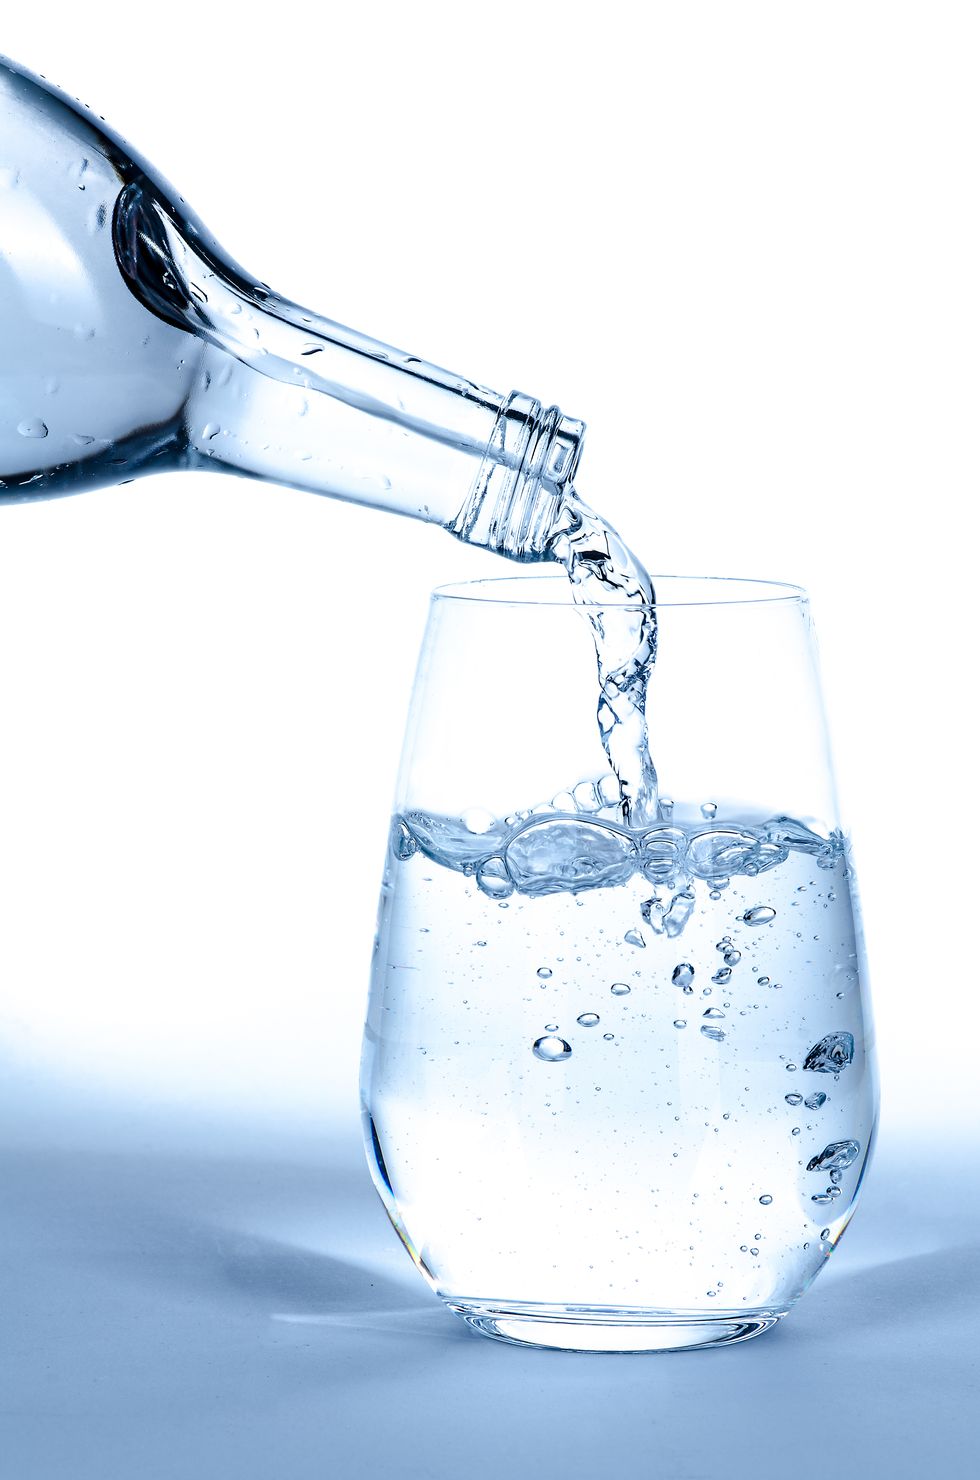 Close-Up Of Water Being Poured Into Glass Against White Background